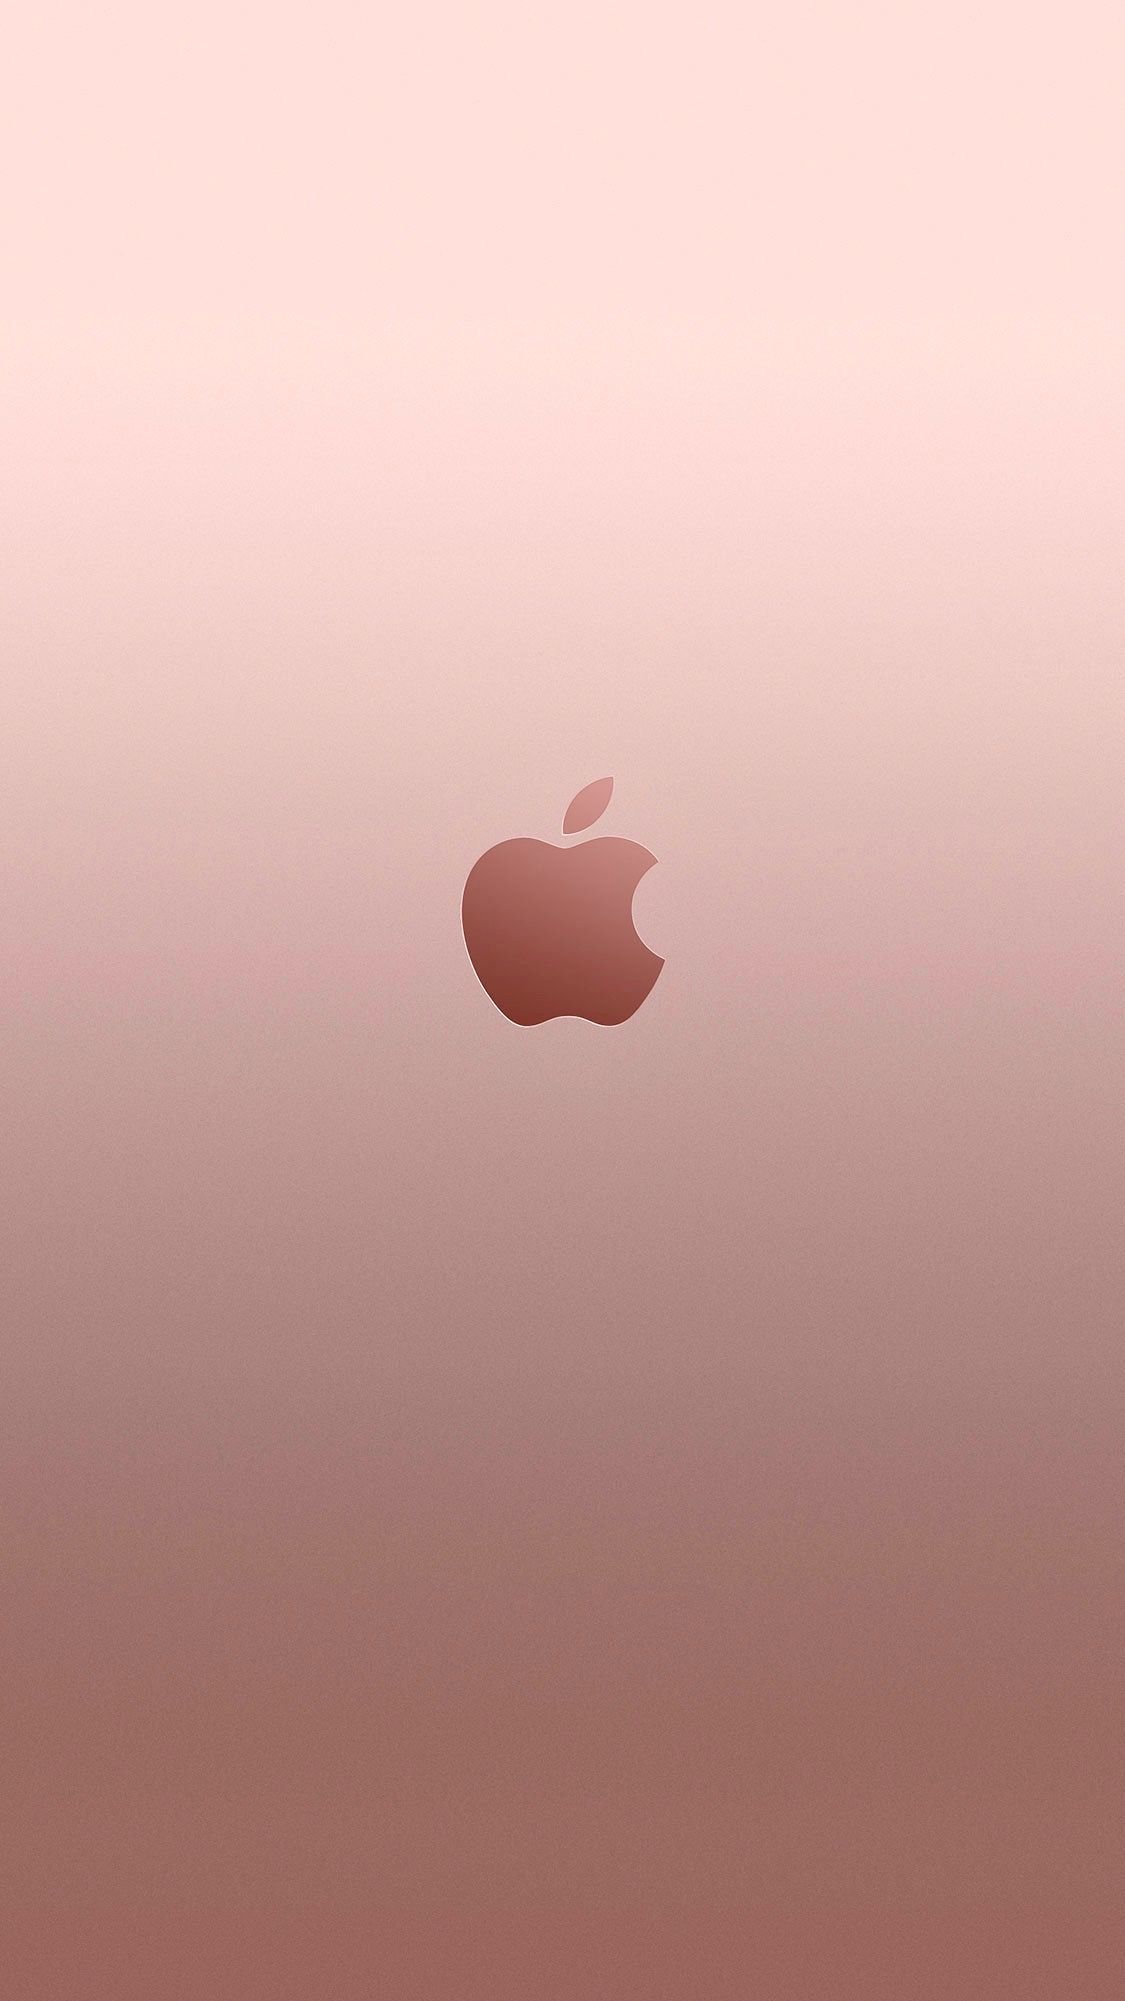 Cool Rose Gold Cute Wallpaper For iPhone 7 Plus image. Gold wallpaper iphone, iPhone 7 plus wallpaper, Rose gold wallpaper iphone